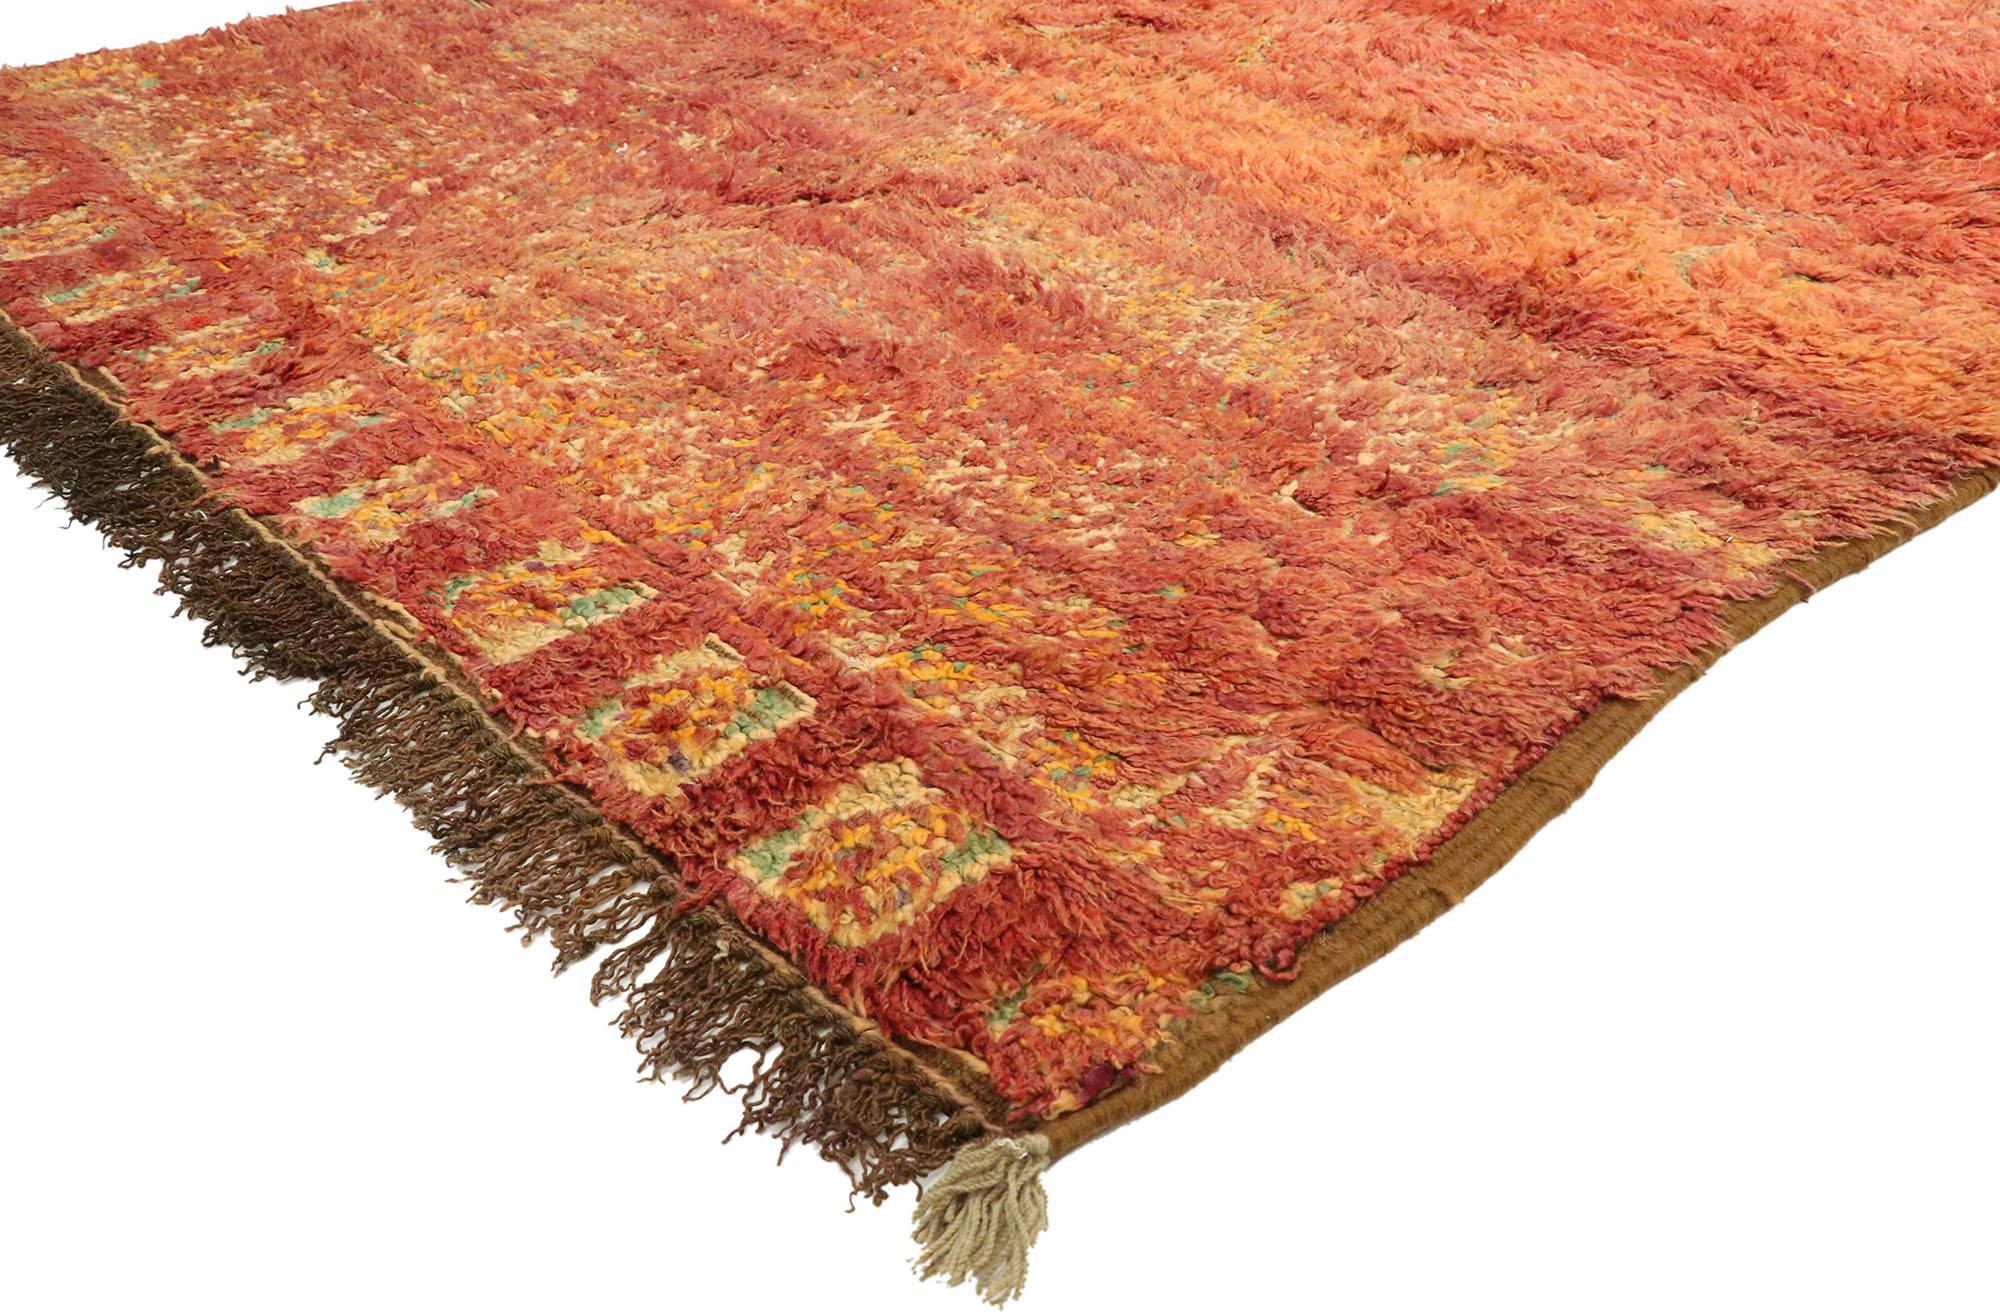 20616, vintage Berber Moroccan rug with Tribal Mid-Century Modern style. Fiery hues of red and orange blend beautifully to conjure imagery of a warm and breezy Moroccan sunset. This vintage Berber Moroccan rug incorporates light yellow and creamy